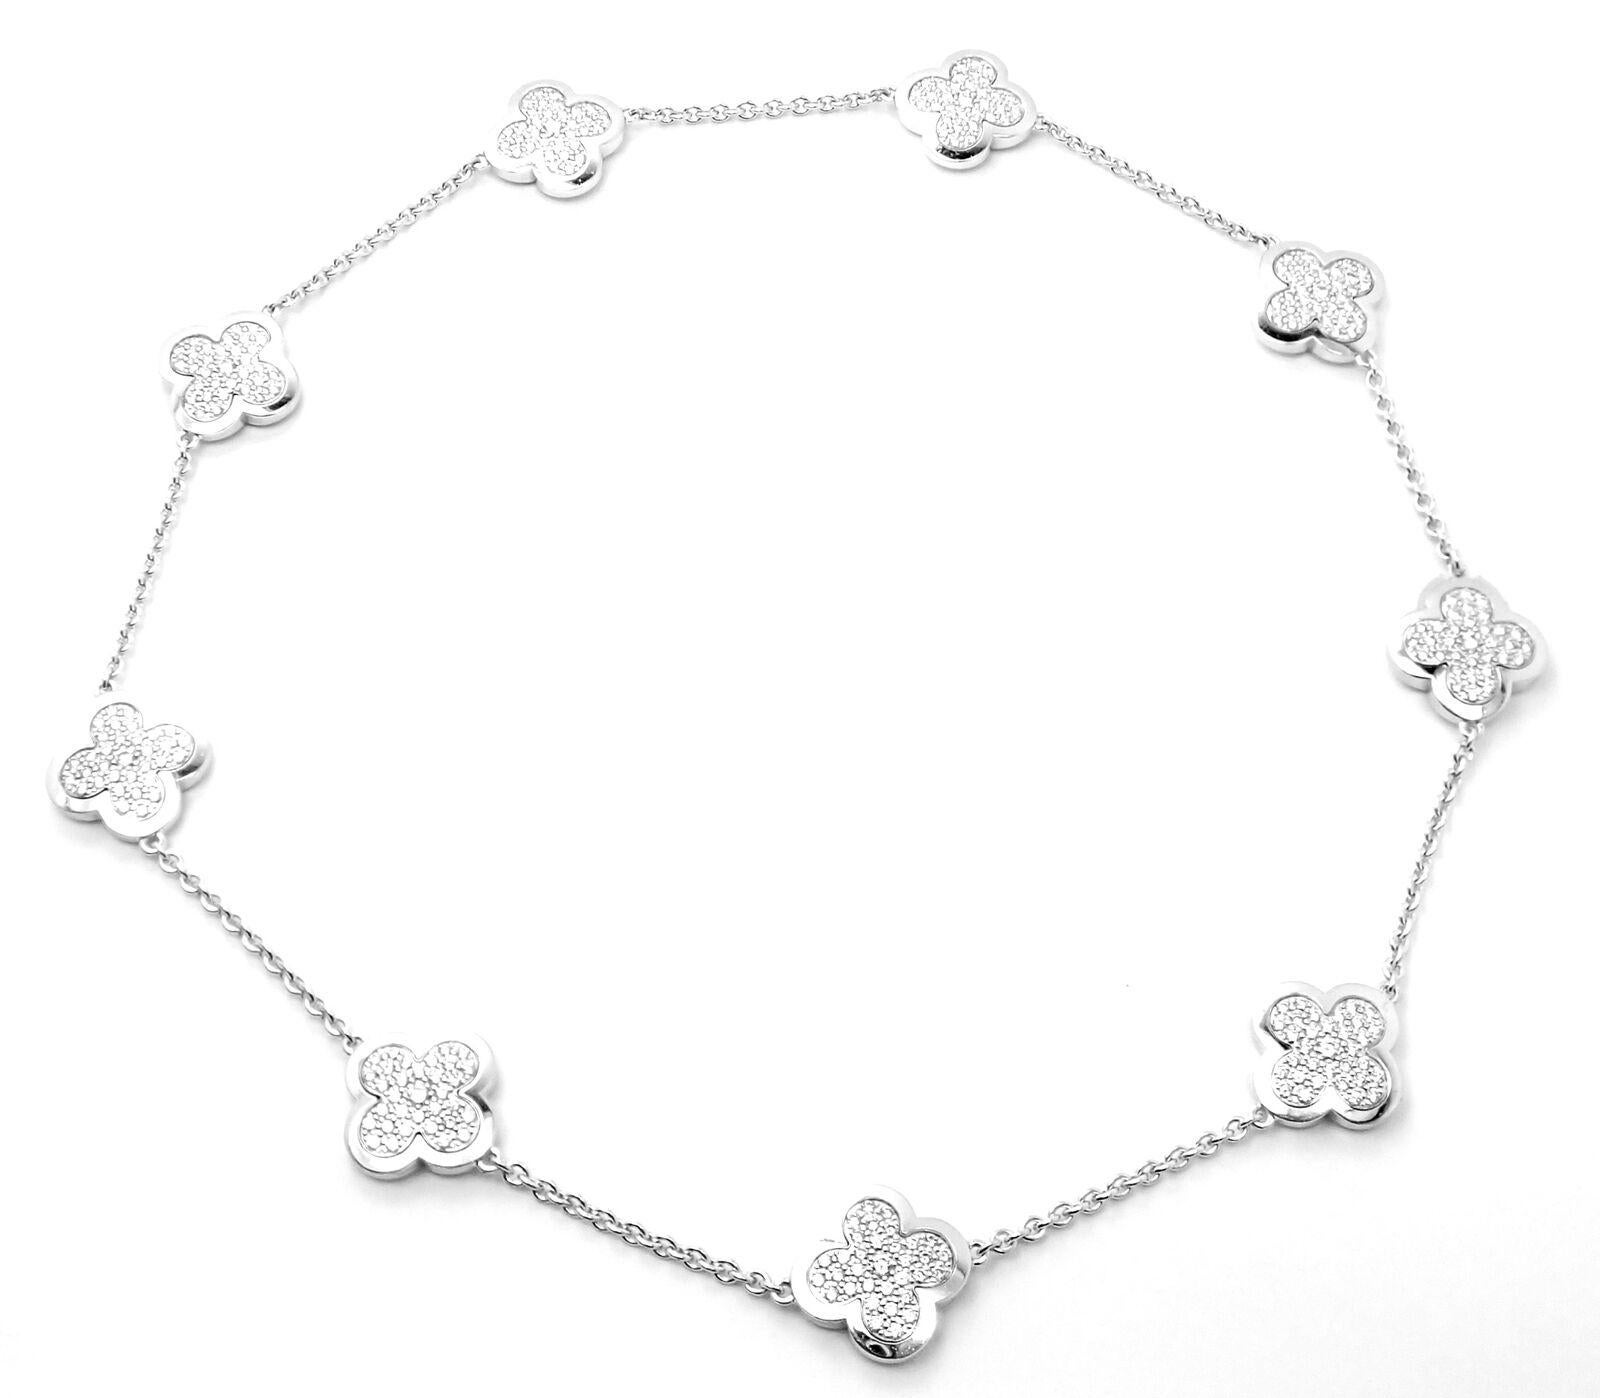 18k White Gold Pure Alhambra 9 Motifs Diamond Necklace by Van Cleef & Arpels.
With 9 diamond Alhambras 16mm each VVS1 clarity, E color total weight approximately 3.50ct
Details:
Length: 16.25